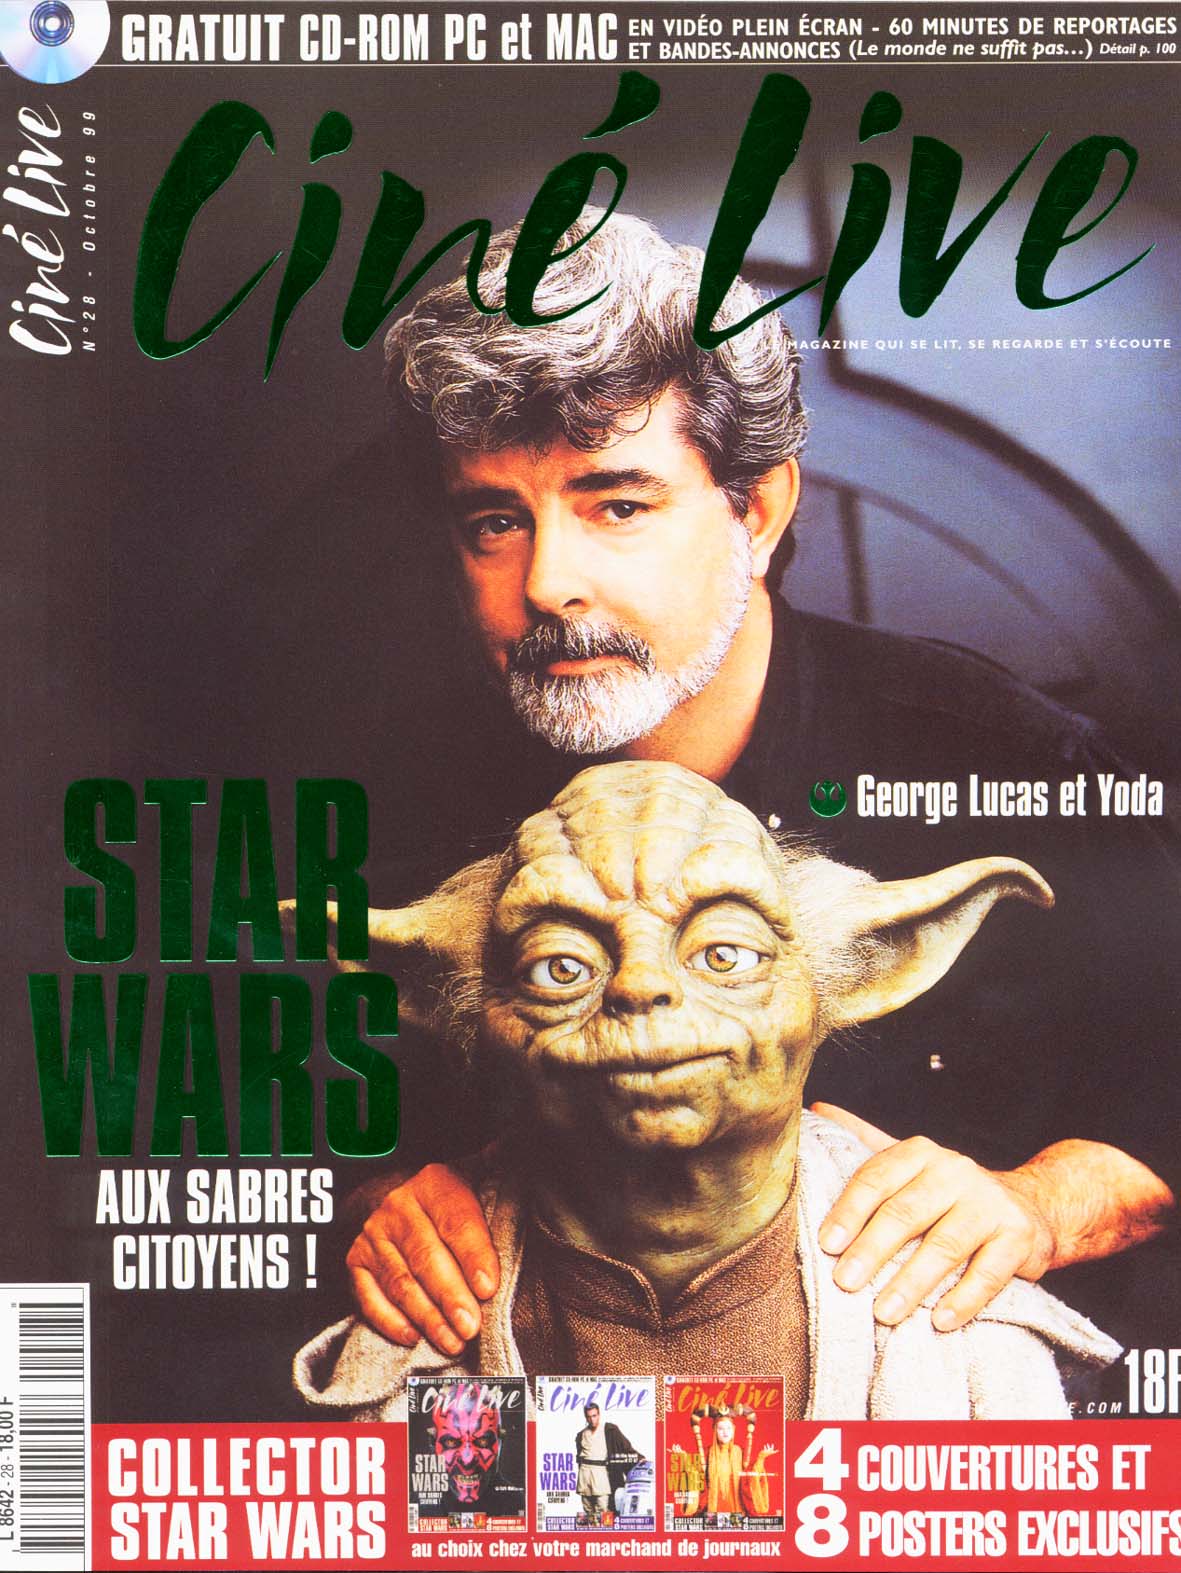 French magizine 'Cine-Live' October 1999 with Yoda and Lucas on the cover (courtesy of Counting Down)